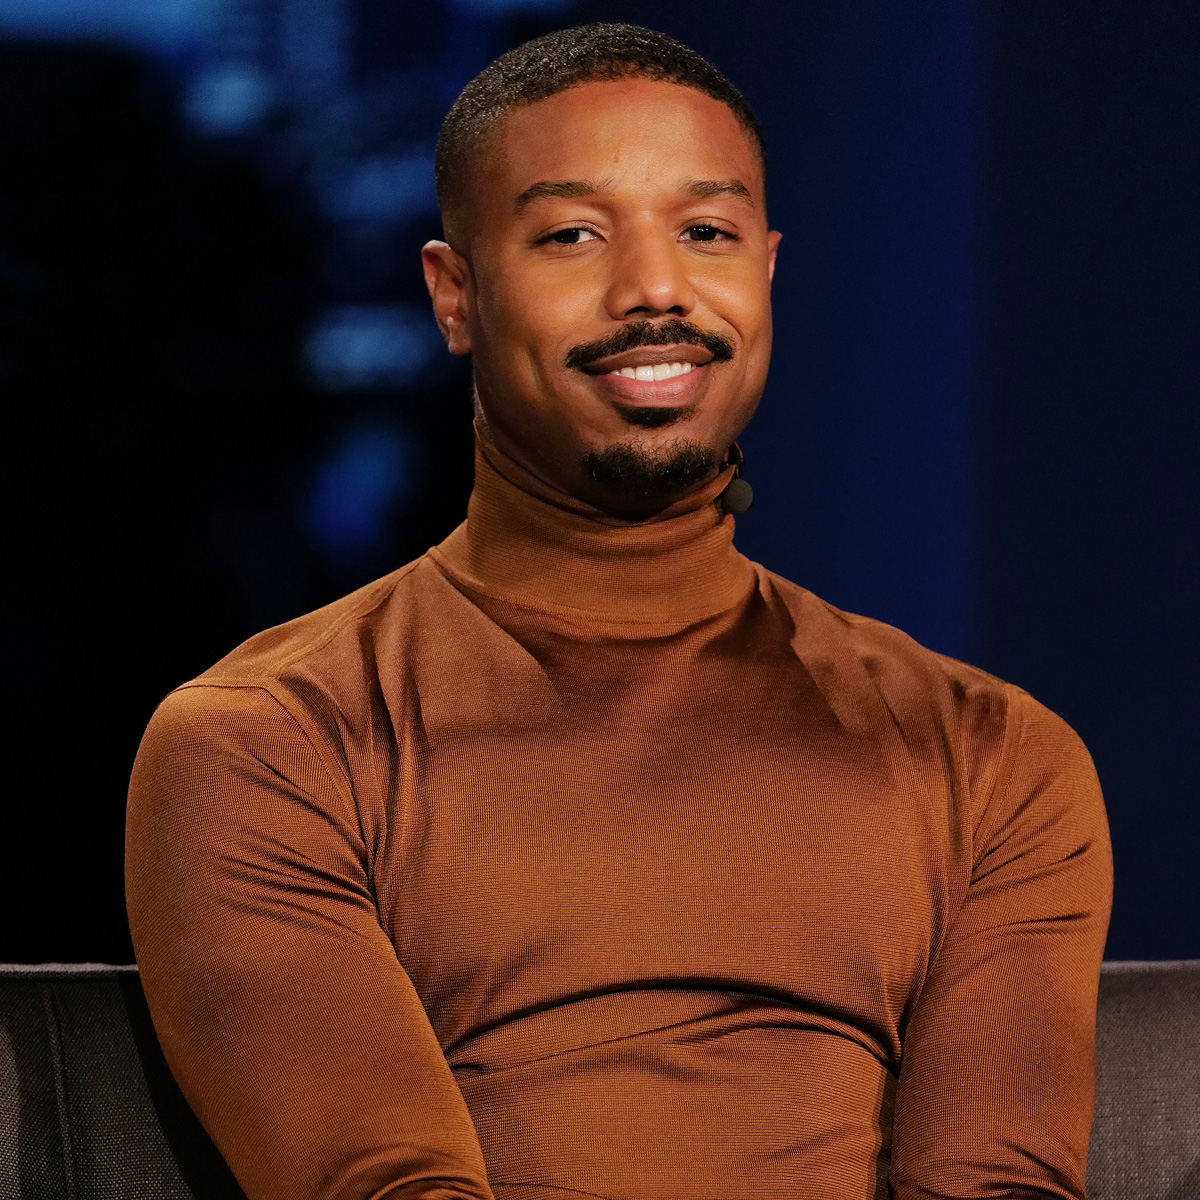 Here's What Michael B. Jordan Does to Stay in Shape